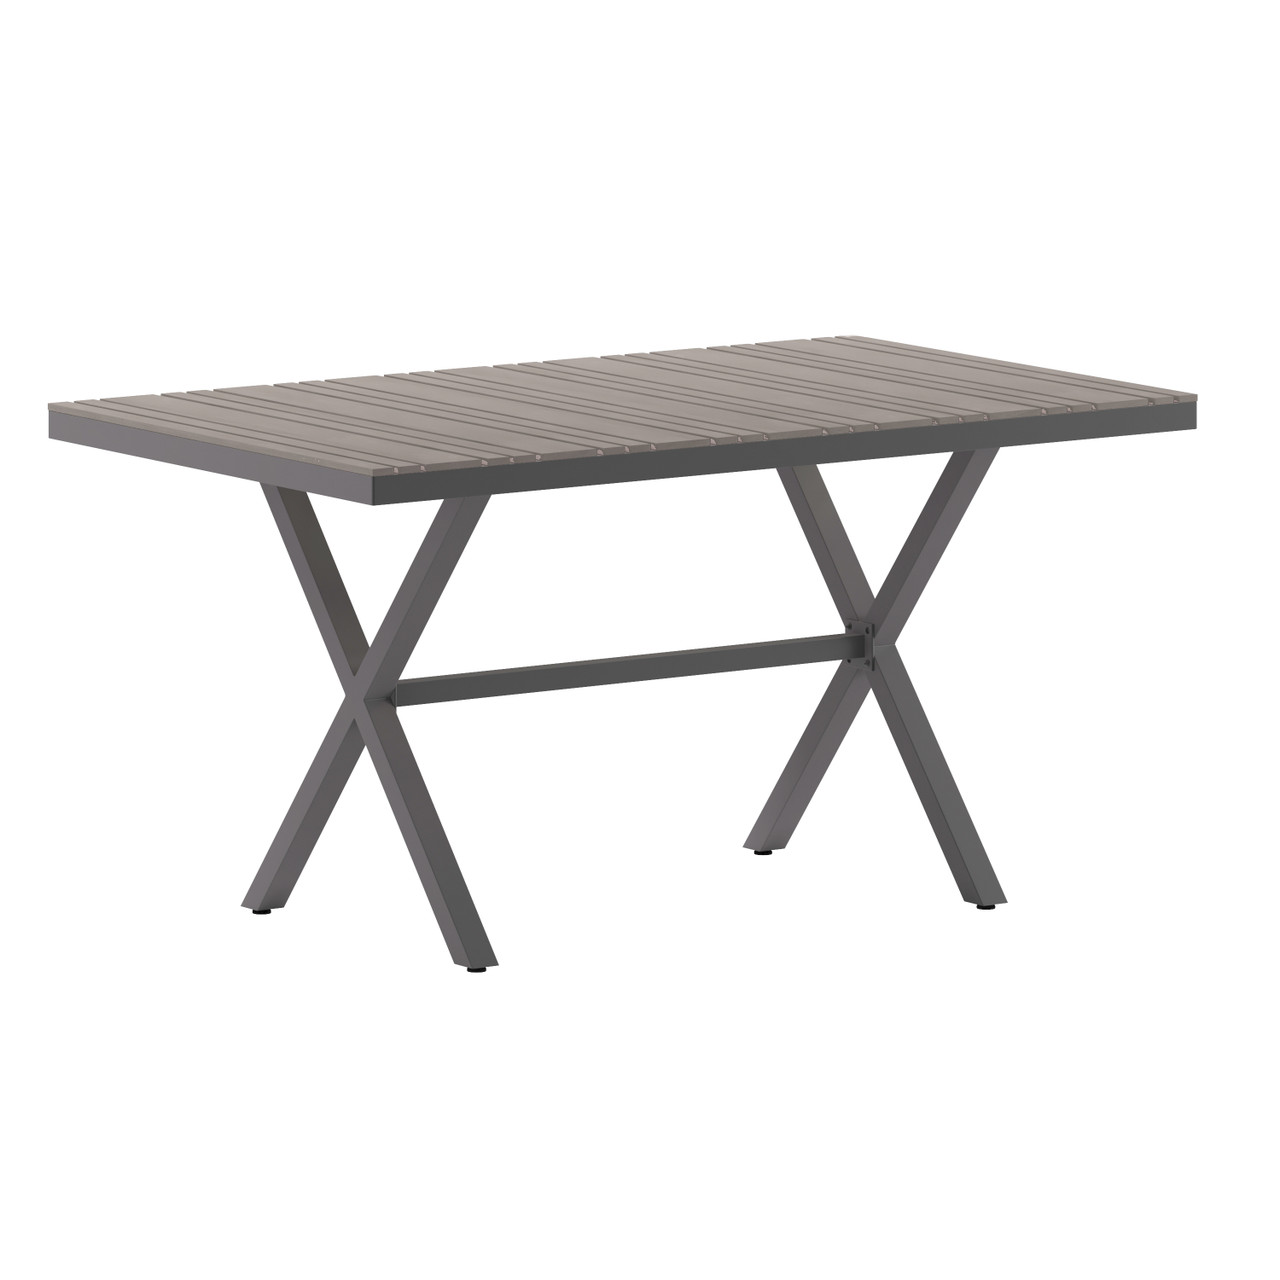 Flash Furniture Finch Commercial Grade X-Frame Outdoor Dining Table 59" x 35.5" w/ Faux Teak Poly Slats & Metal Frame, Gray/Gray, Model#